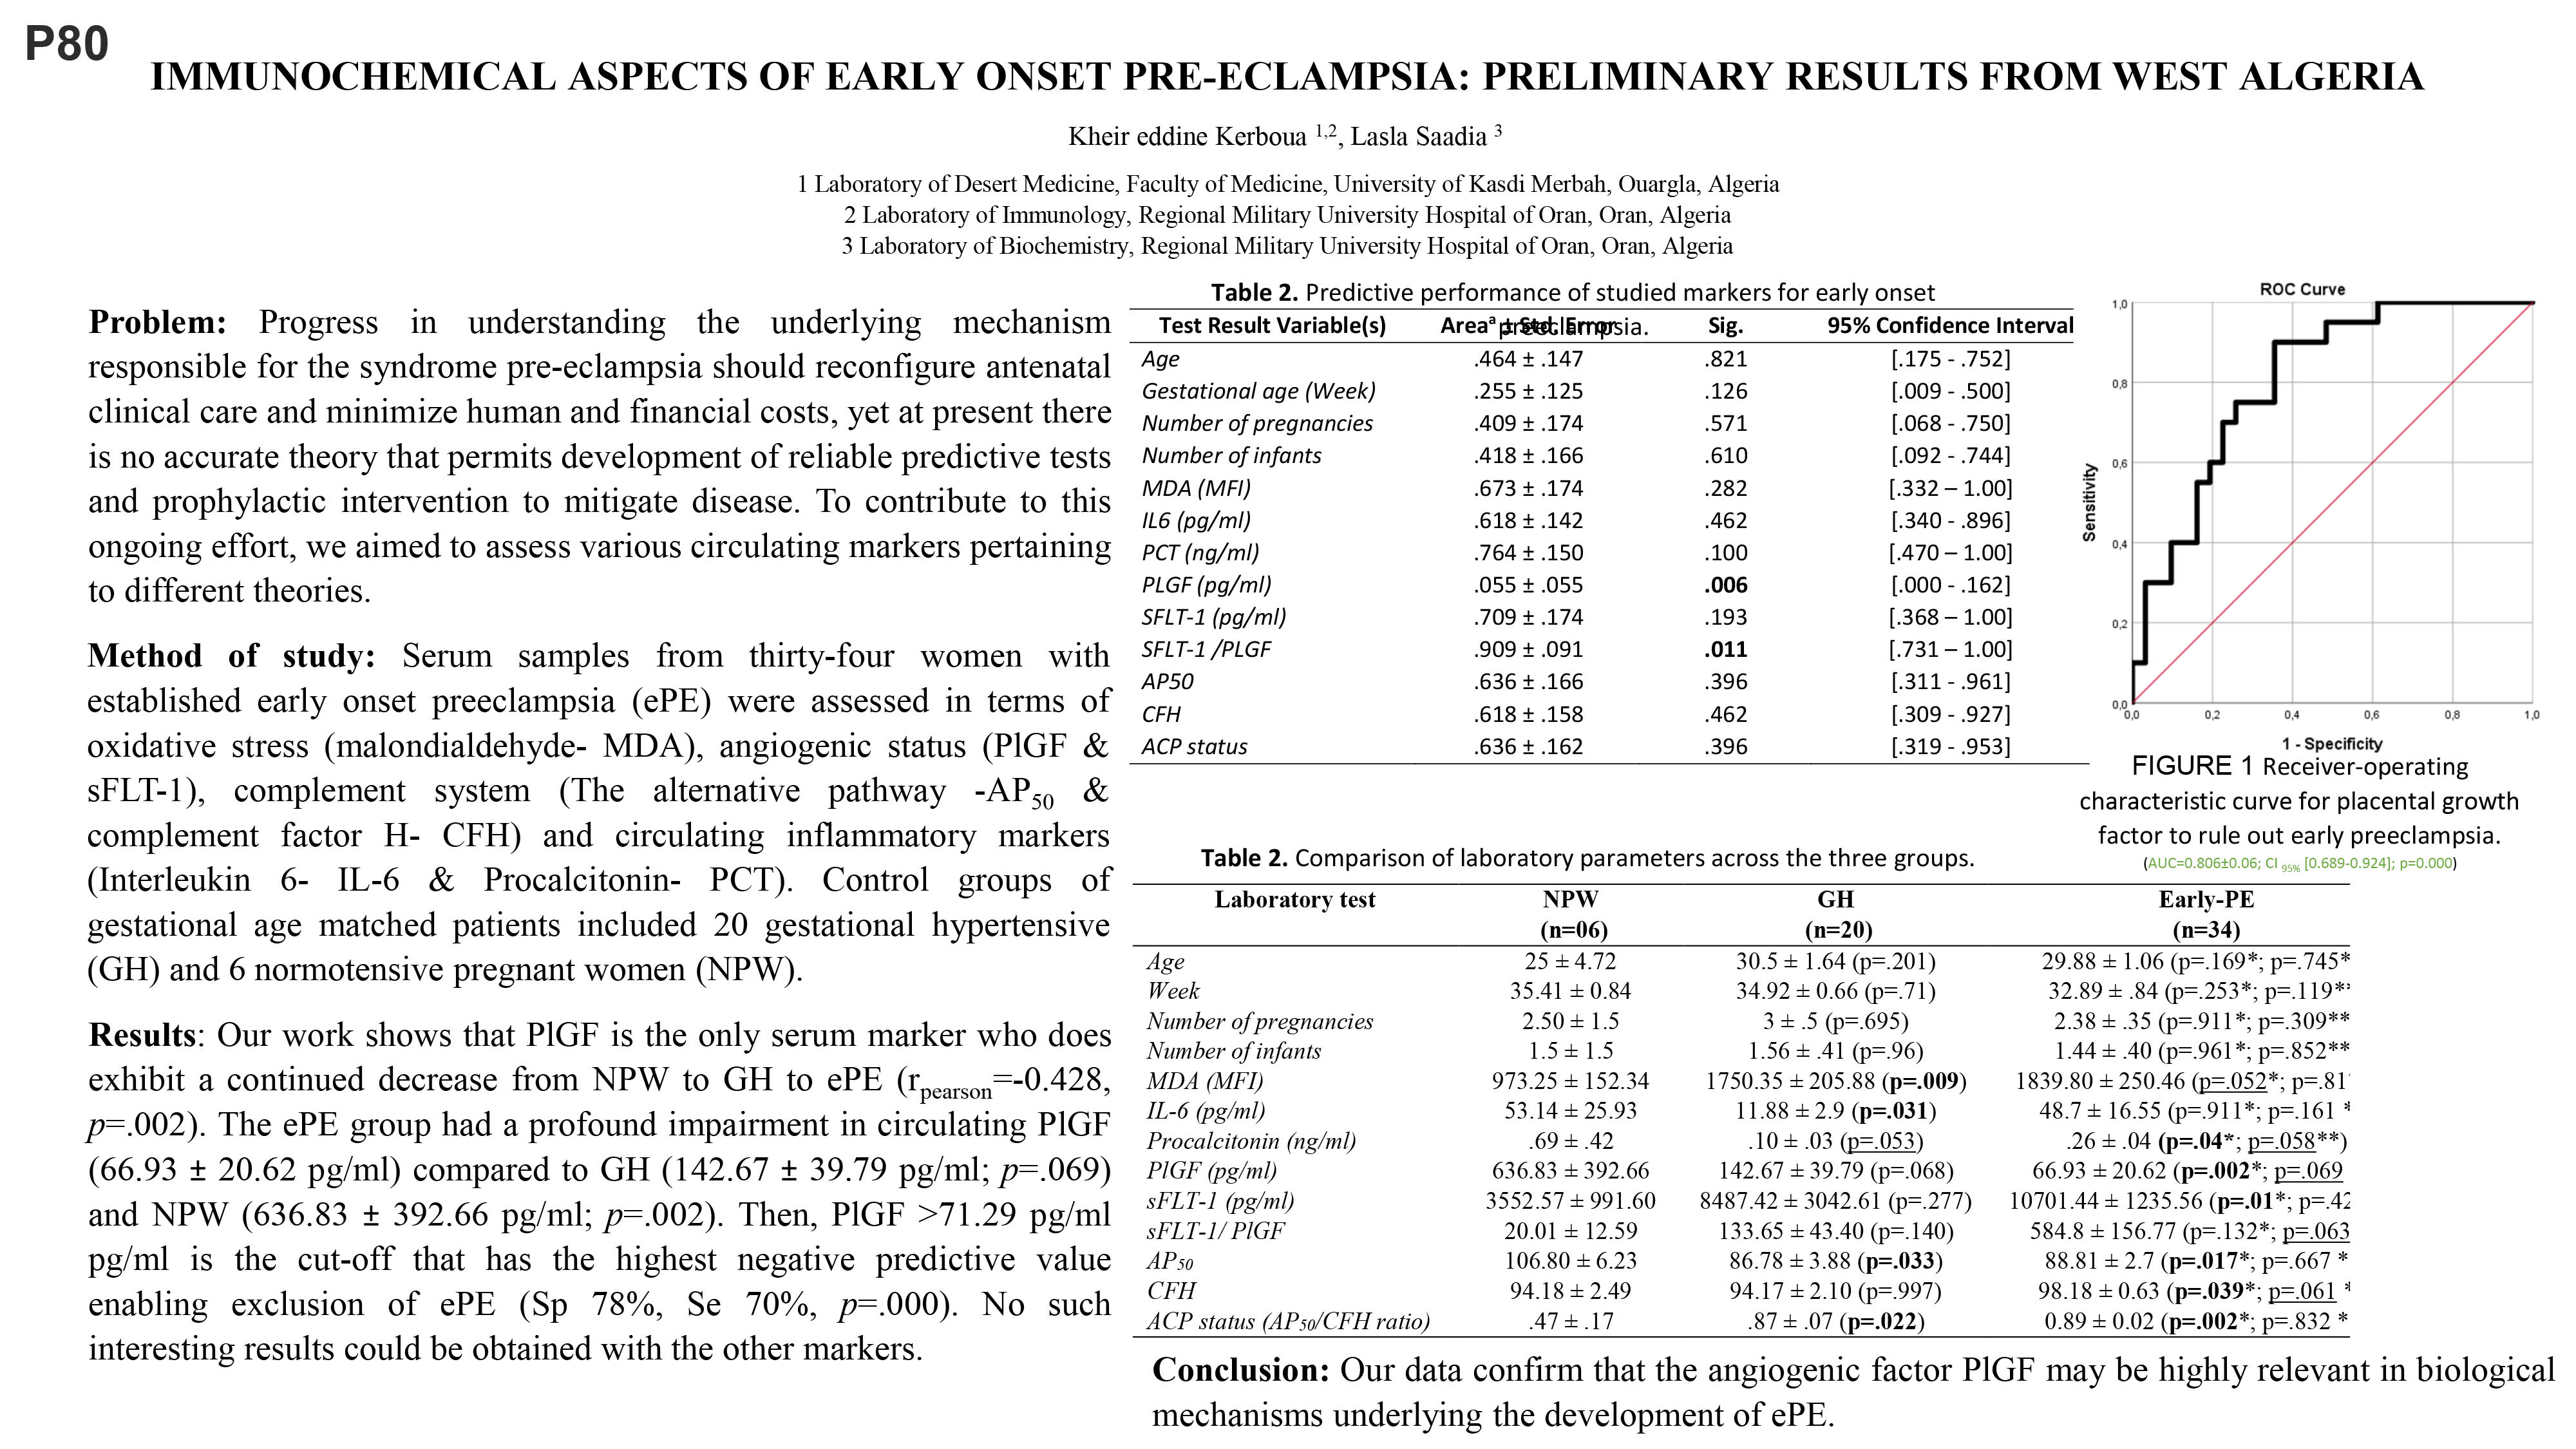 SANTE DE LA FEMME : P80- IMMUNOCHEMICAL ASPECTS OF EARLY ONSET PRE-ECLAMPSIA: PRELIMINARY RESULTS FROM WEST ALGERIA